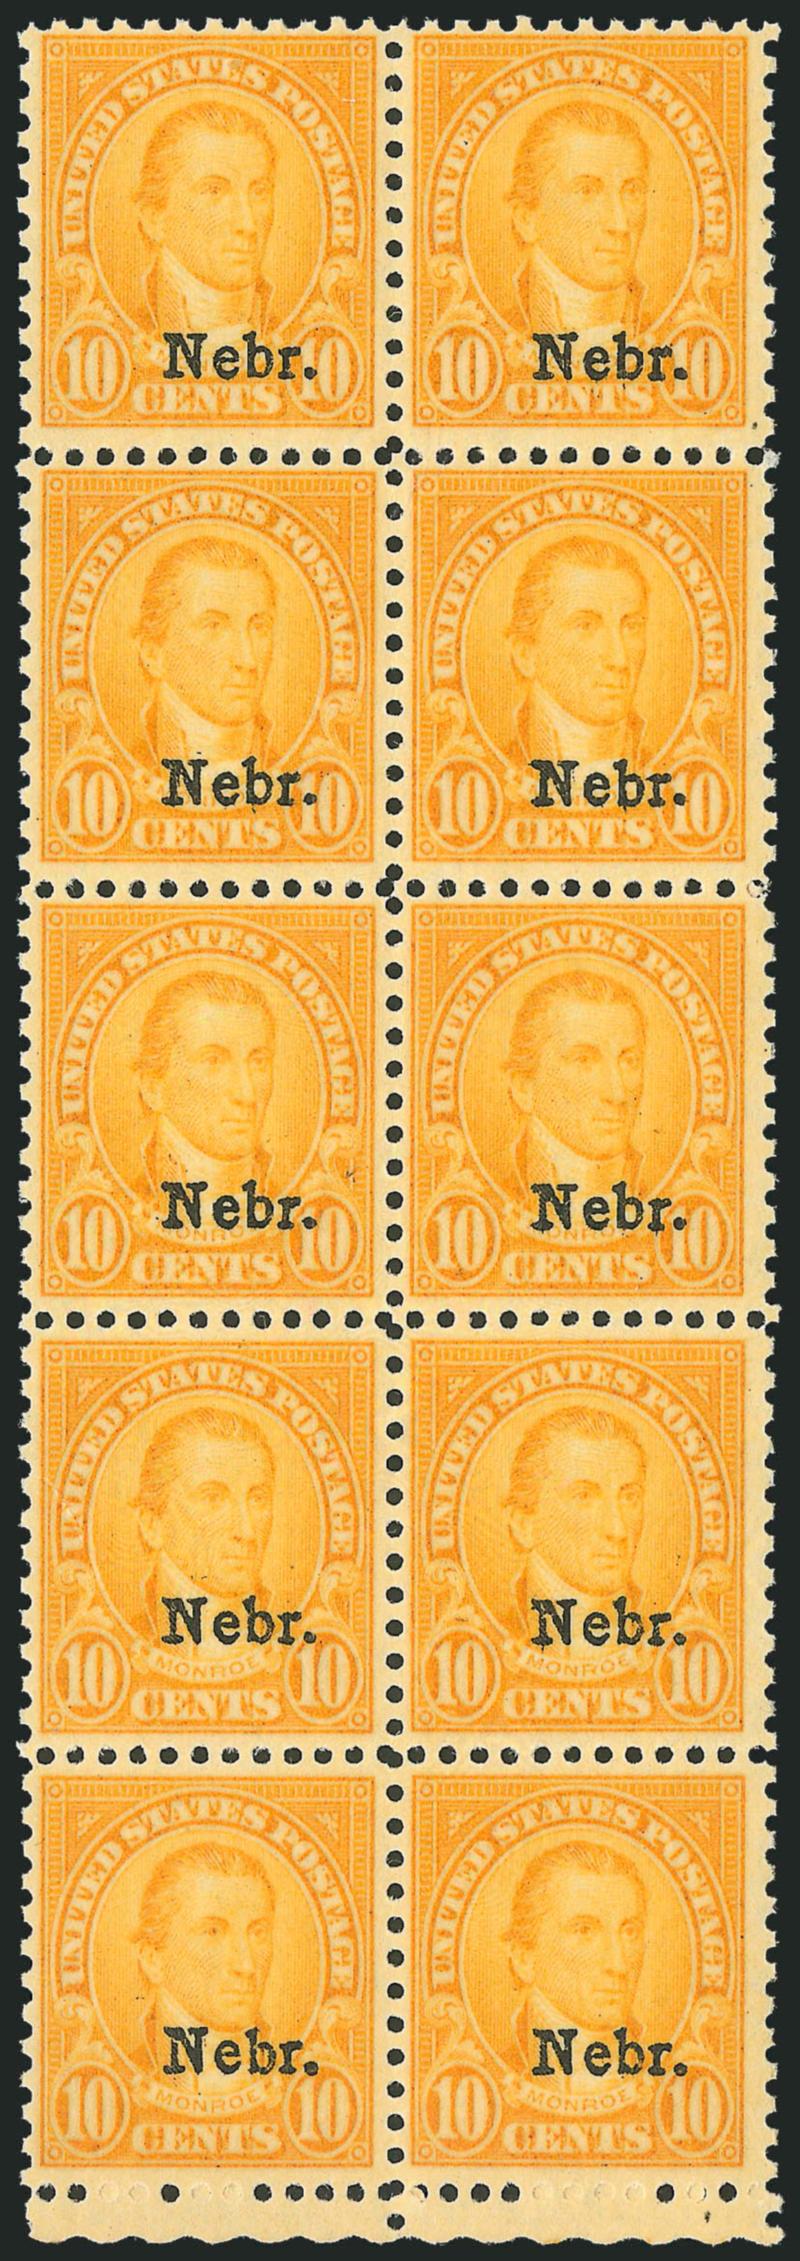 10c Nebr. Ovpt. (679).> Mint N.H. vertical block of ten with bottom selvage, rich color, fresh and Fine-Very Fine